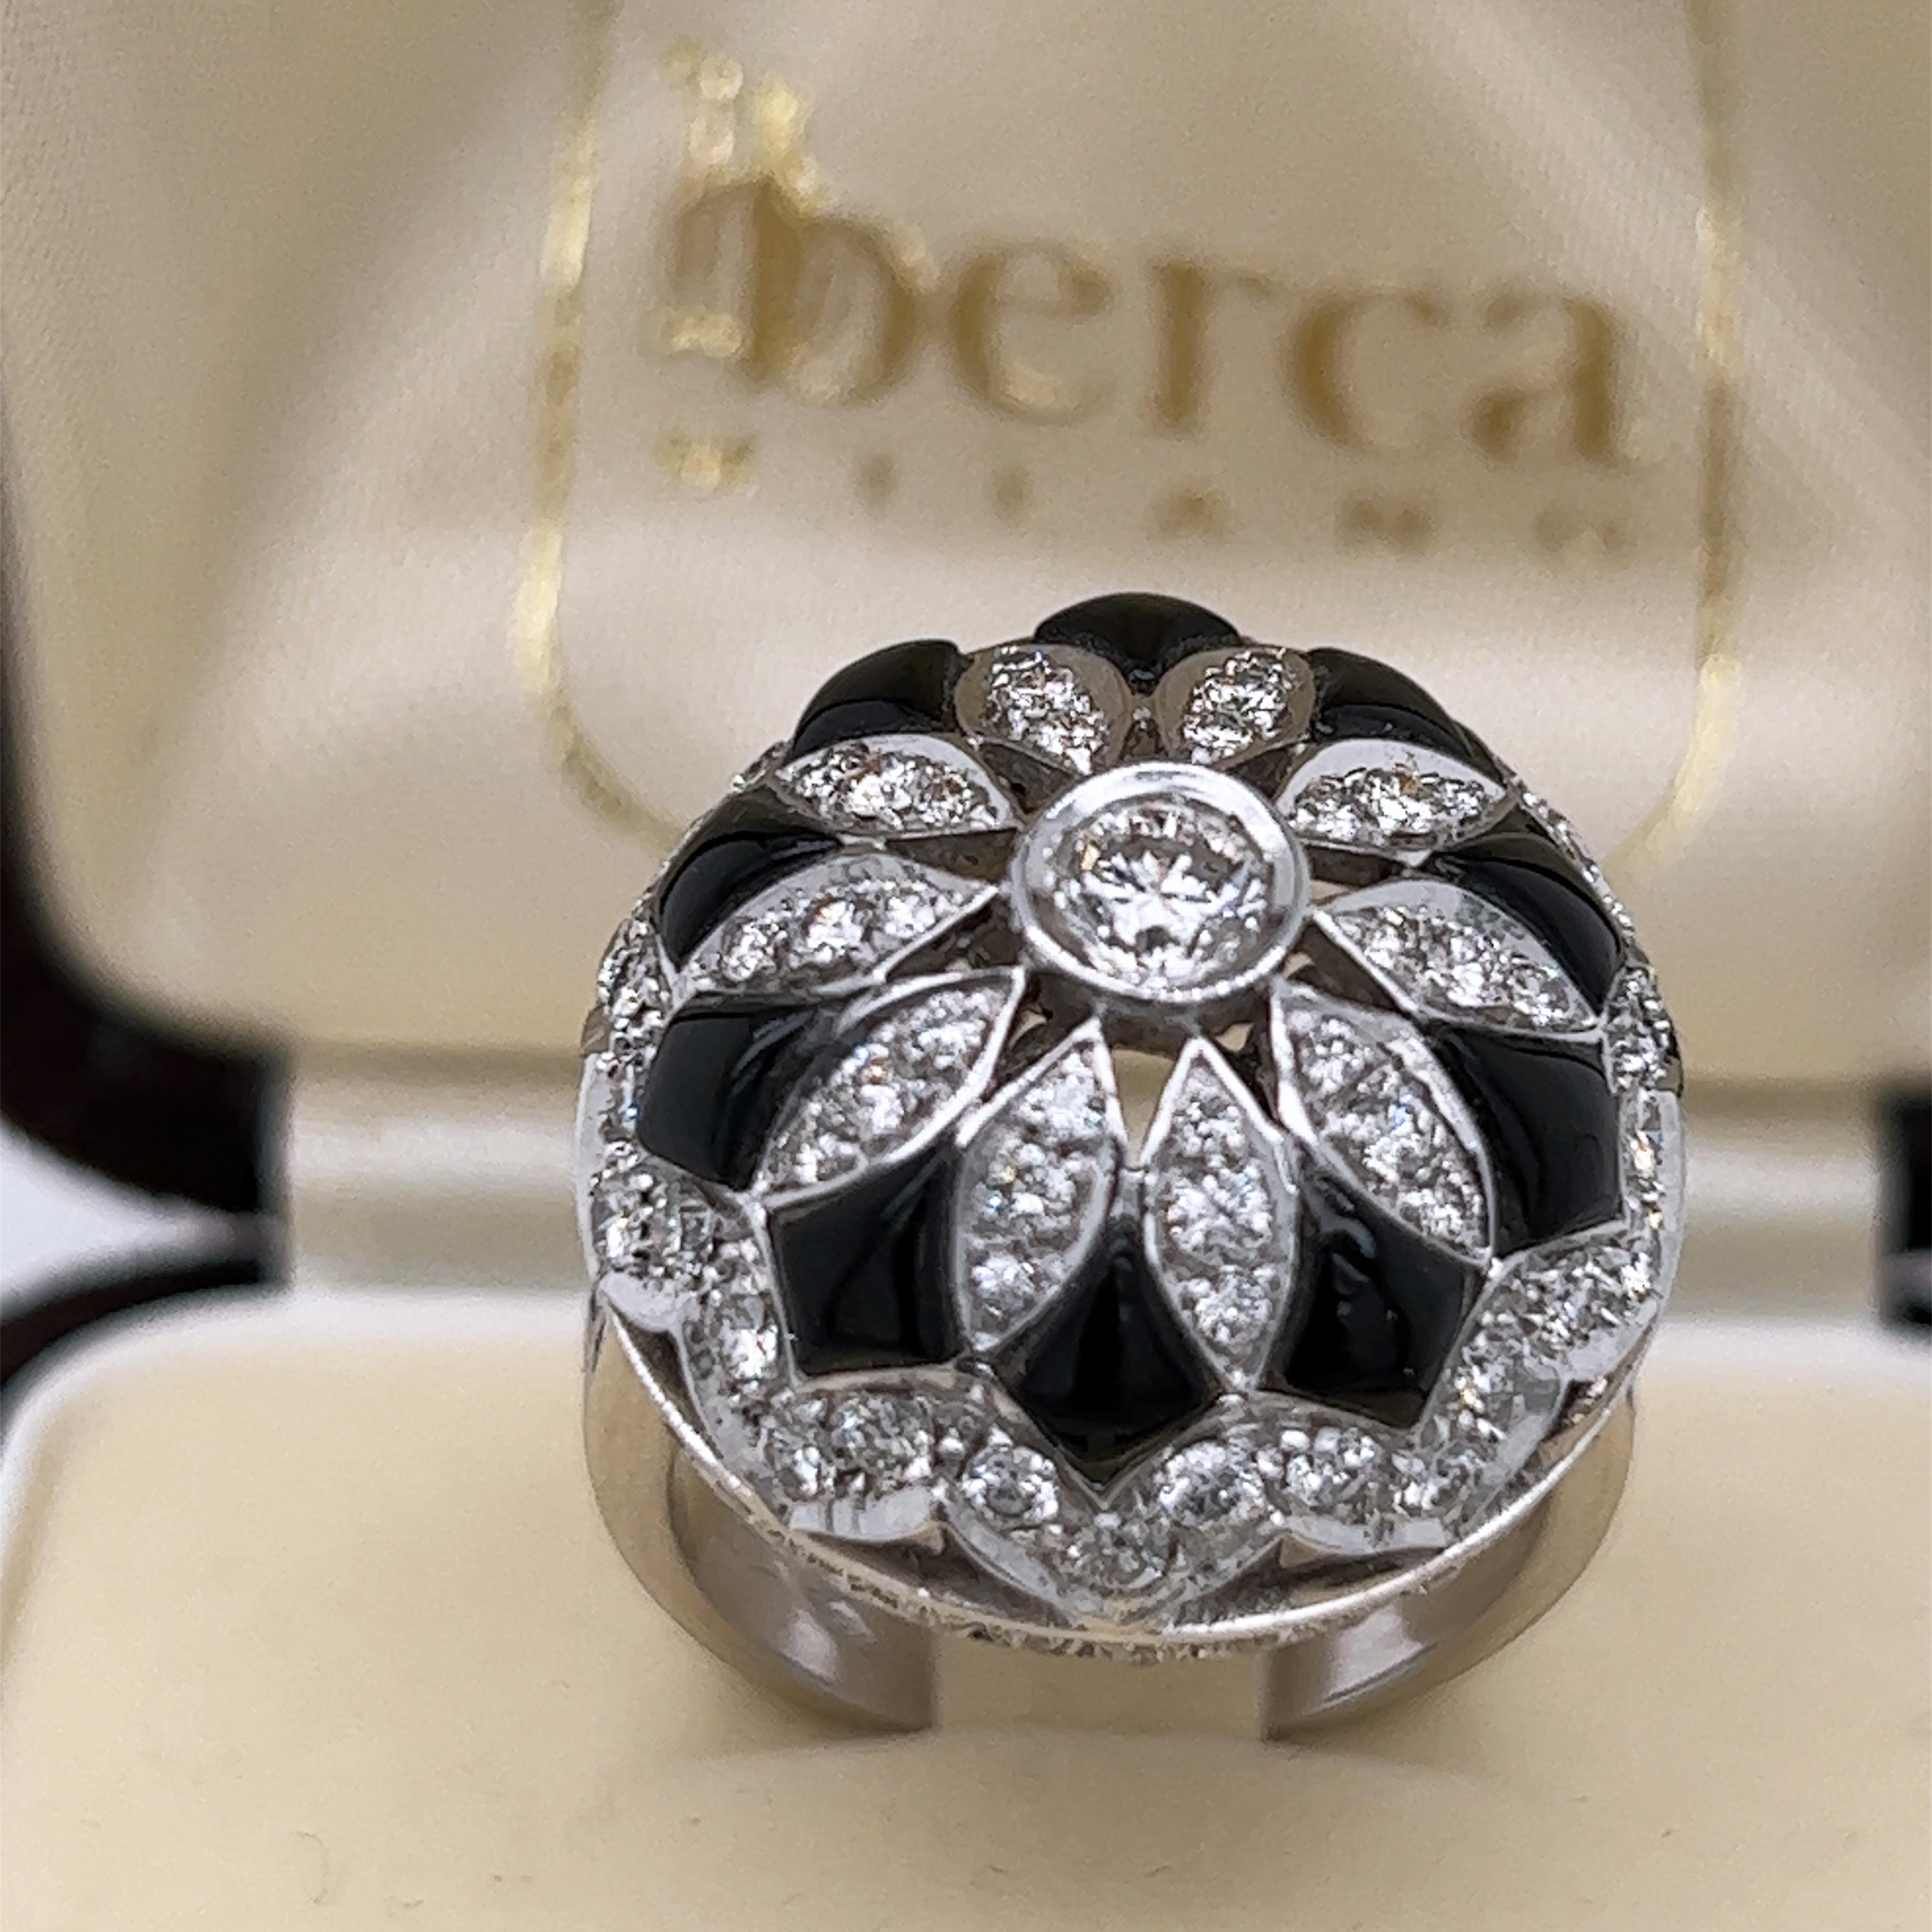 Brilliant Cut Berca 1.80 Kt White Diamond Onyx 18 Carat White Gold Setting Dome Cocktail Ring For Sale